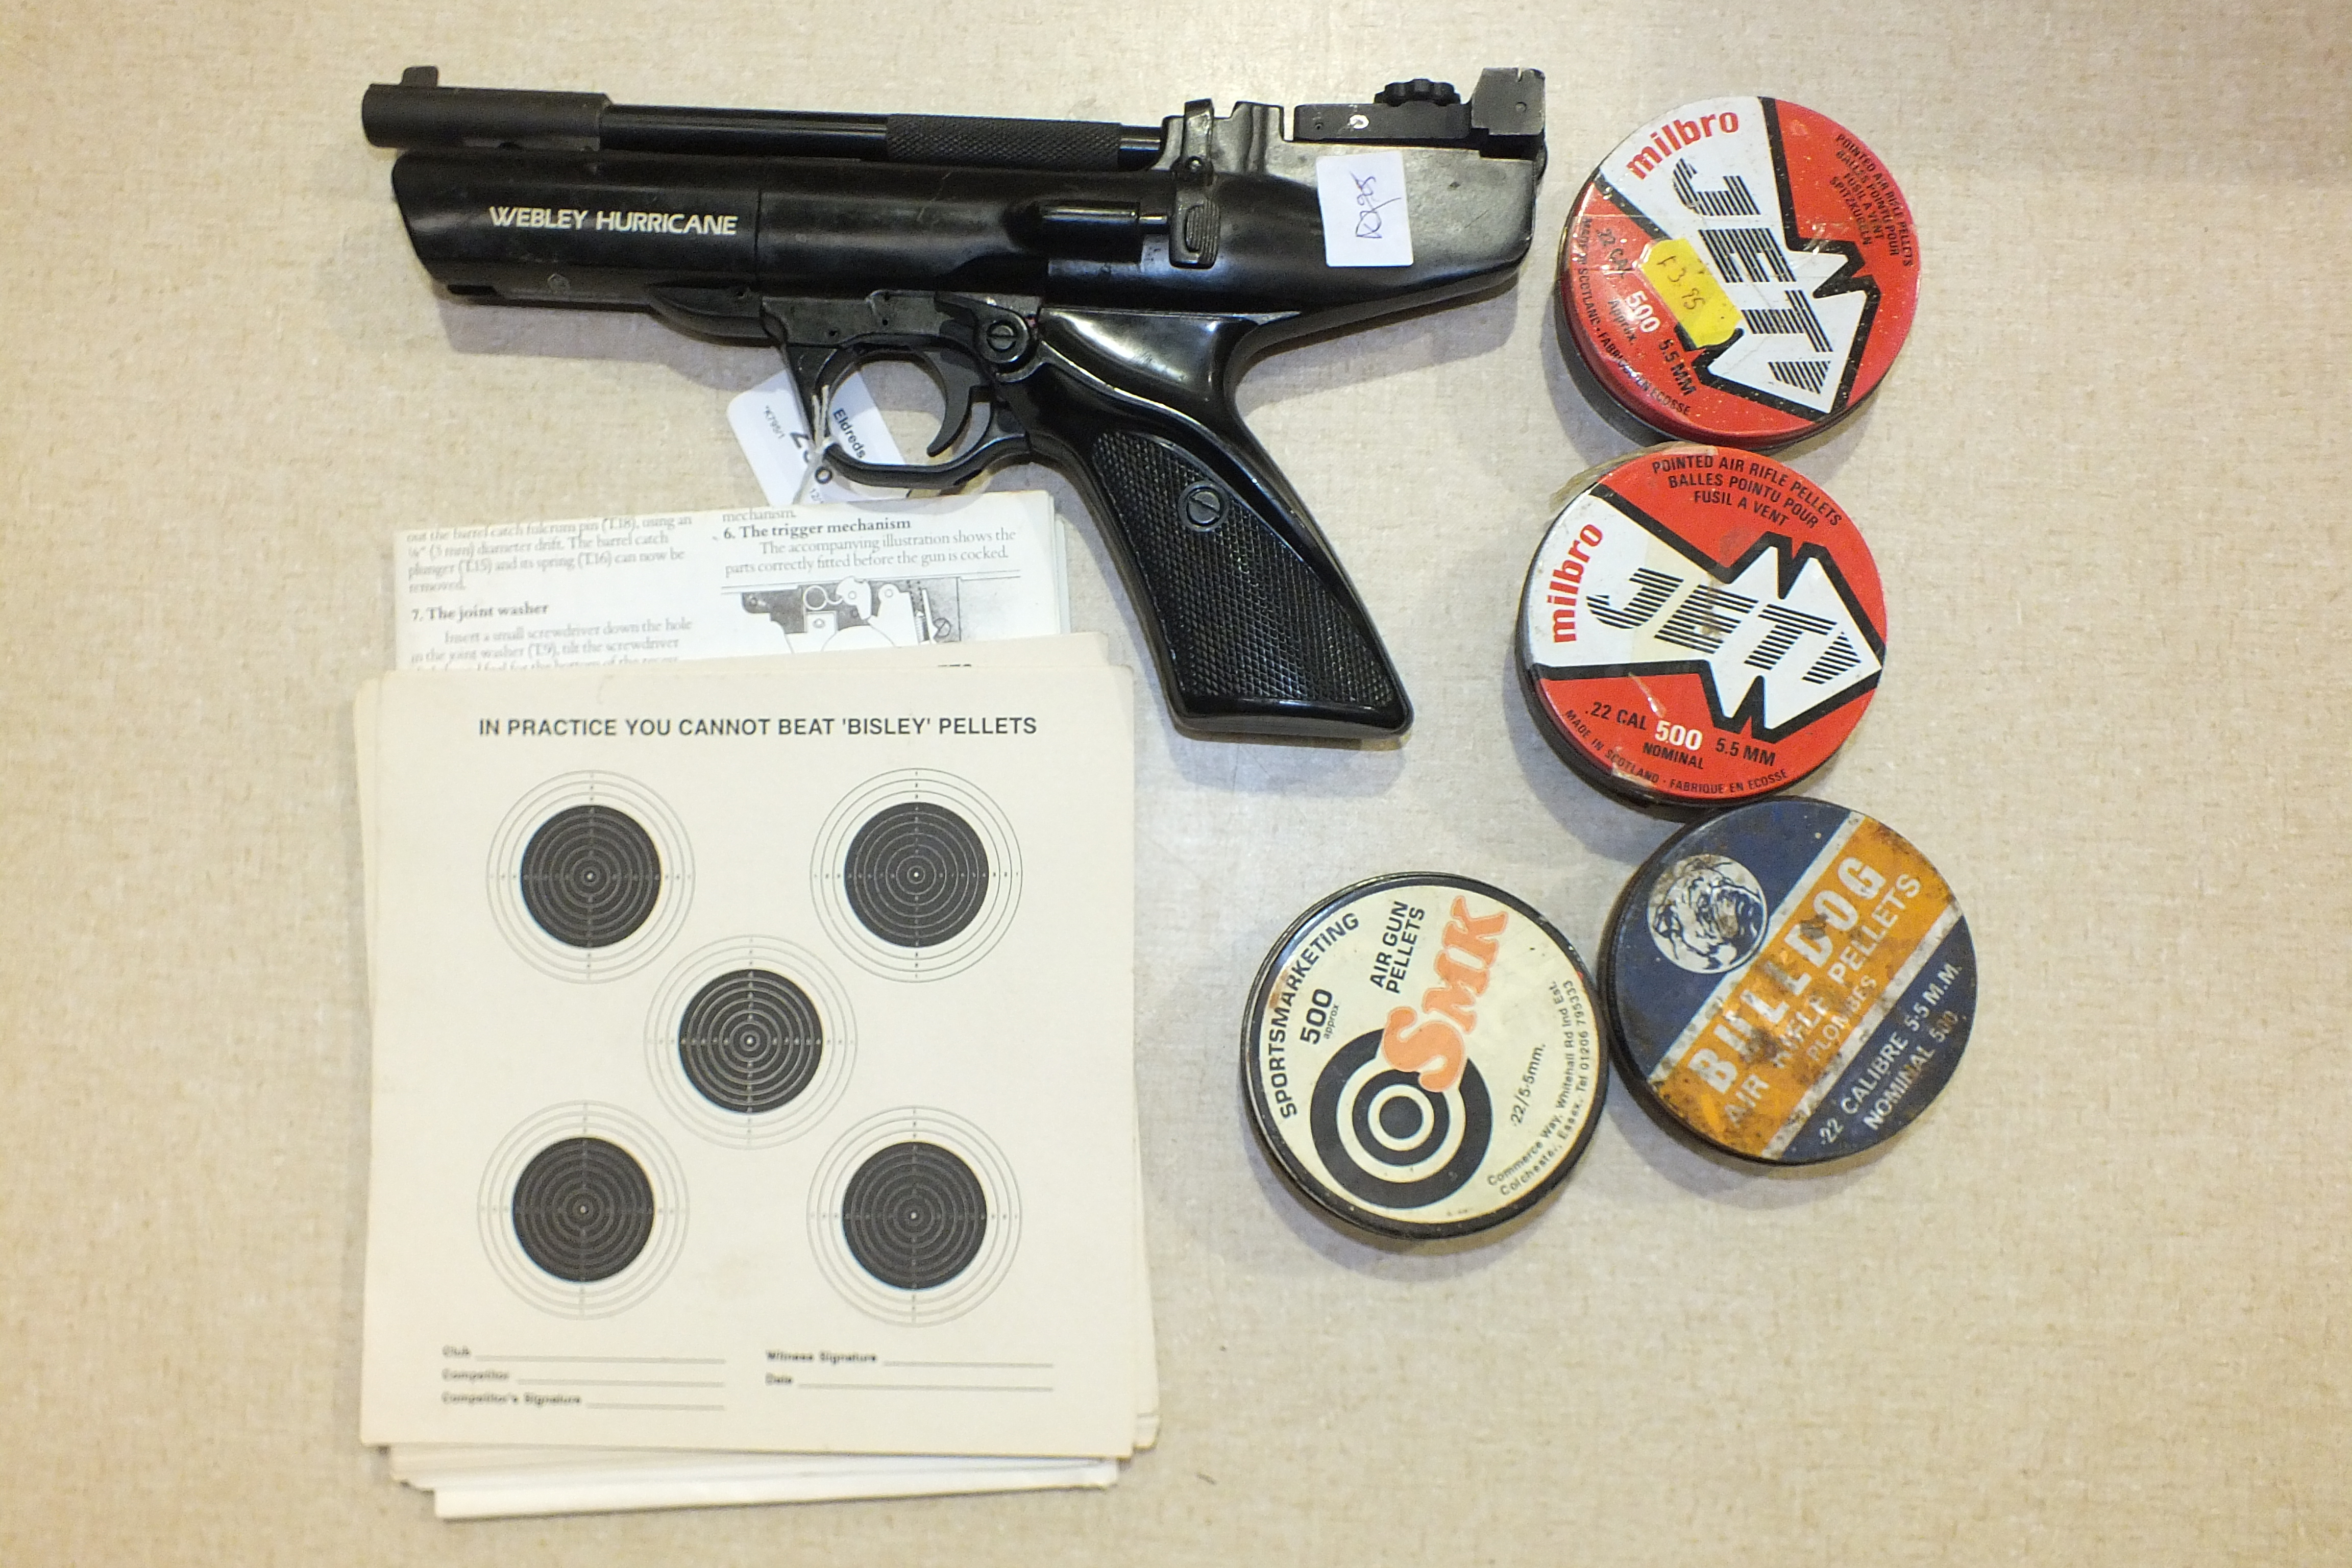 A Webley Hurricane .22 air pistol with pellets and targets.